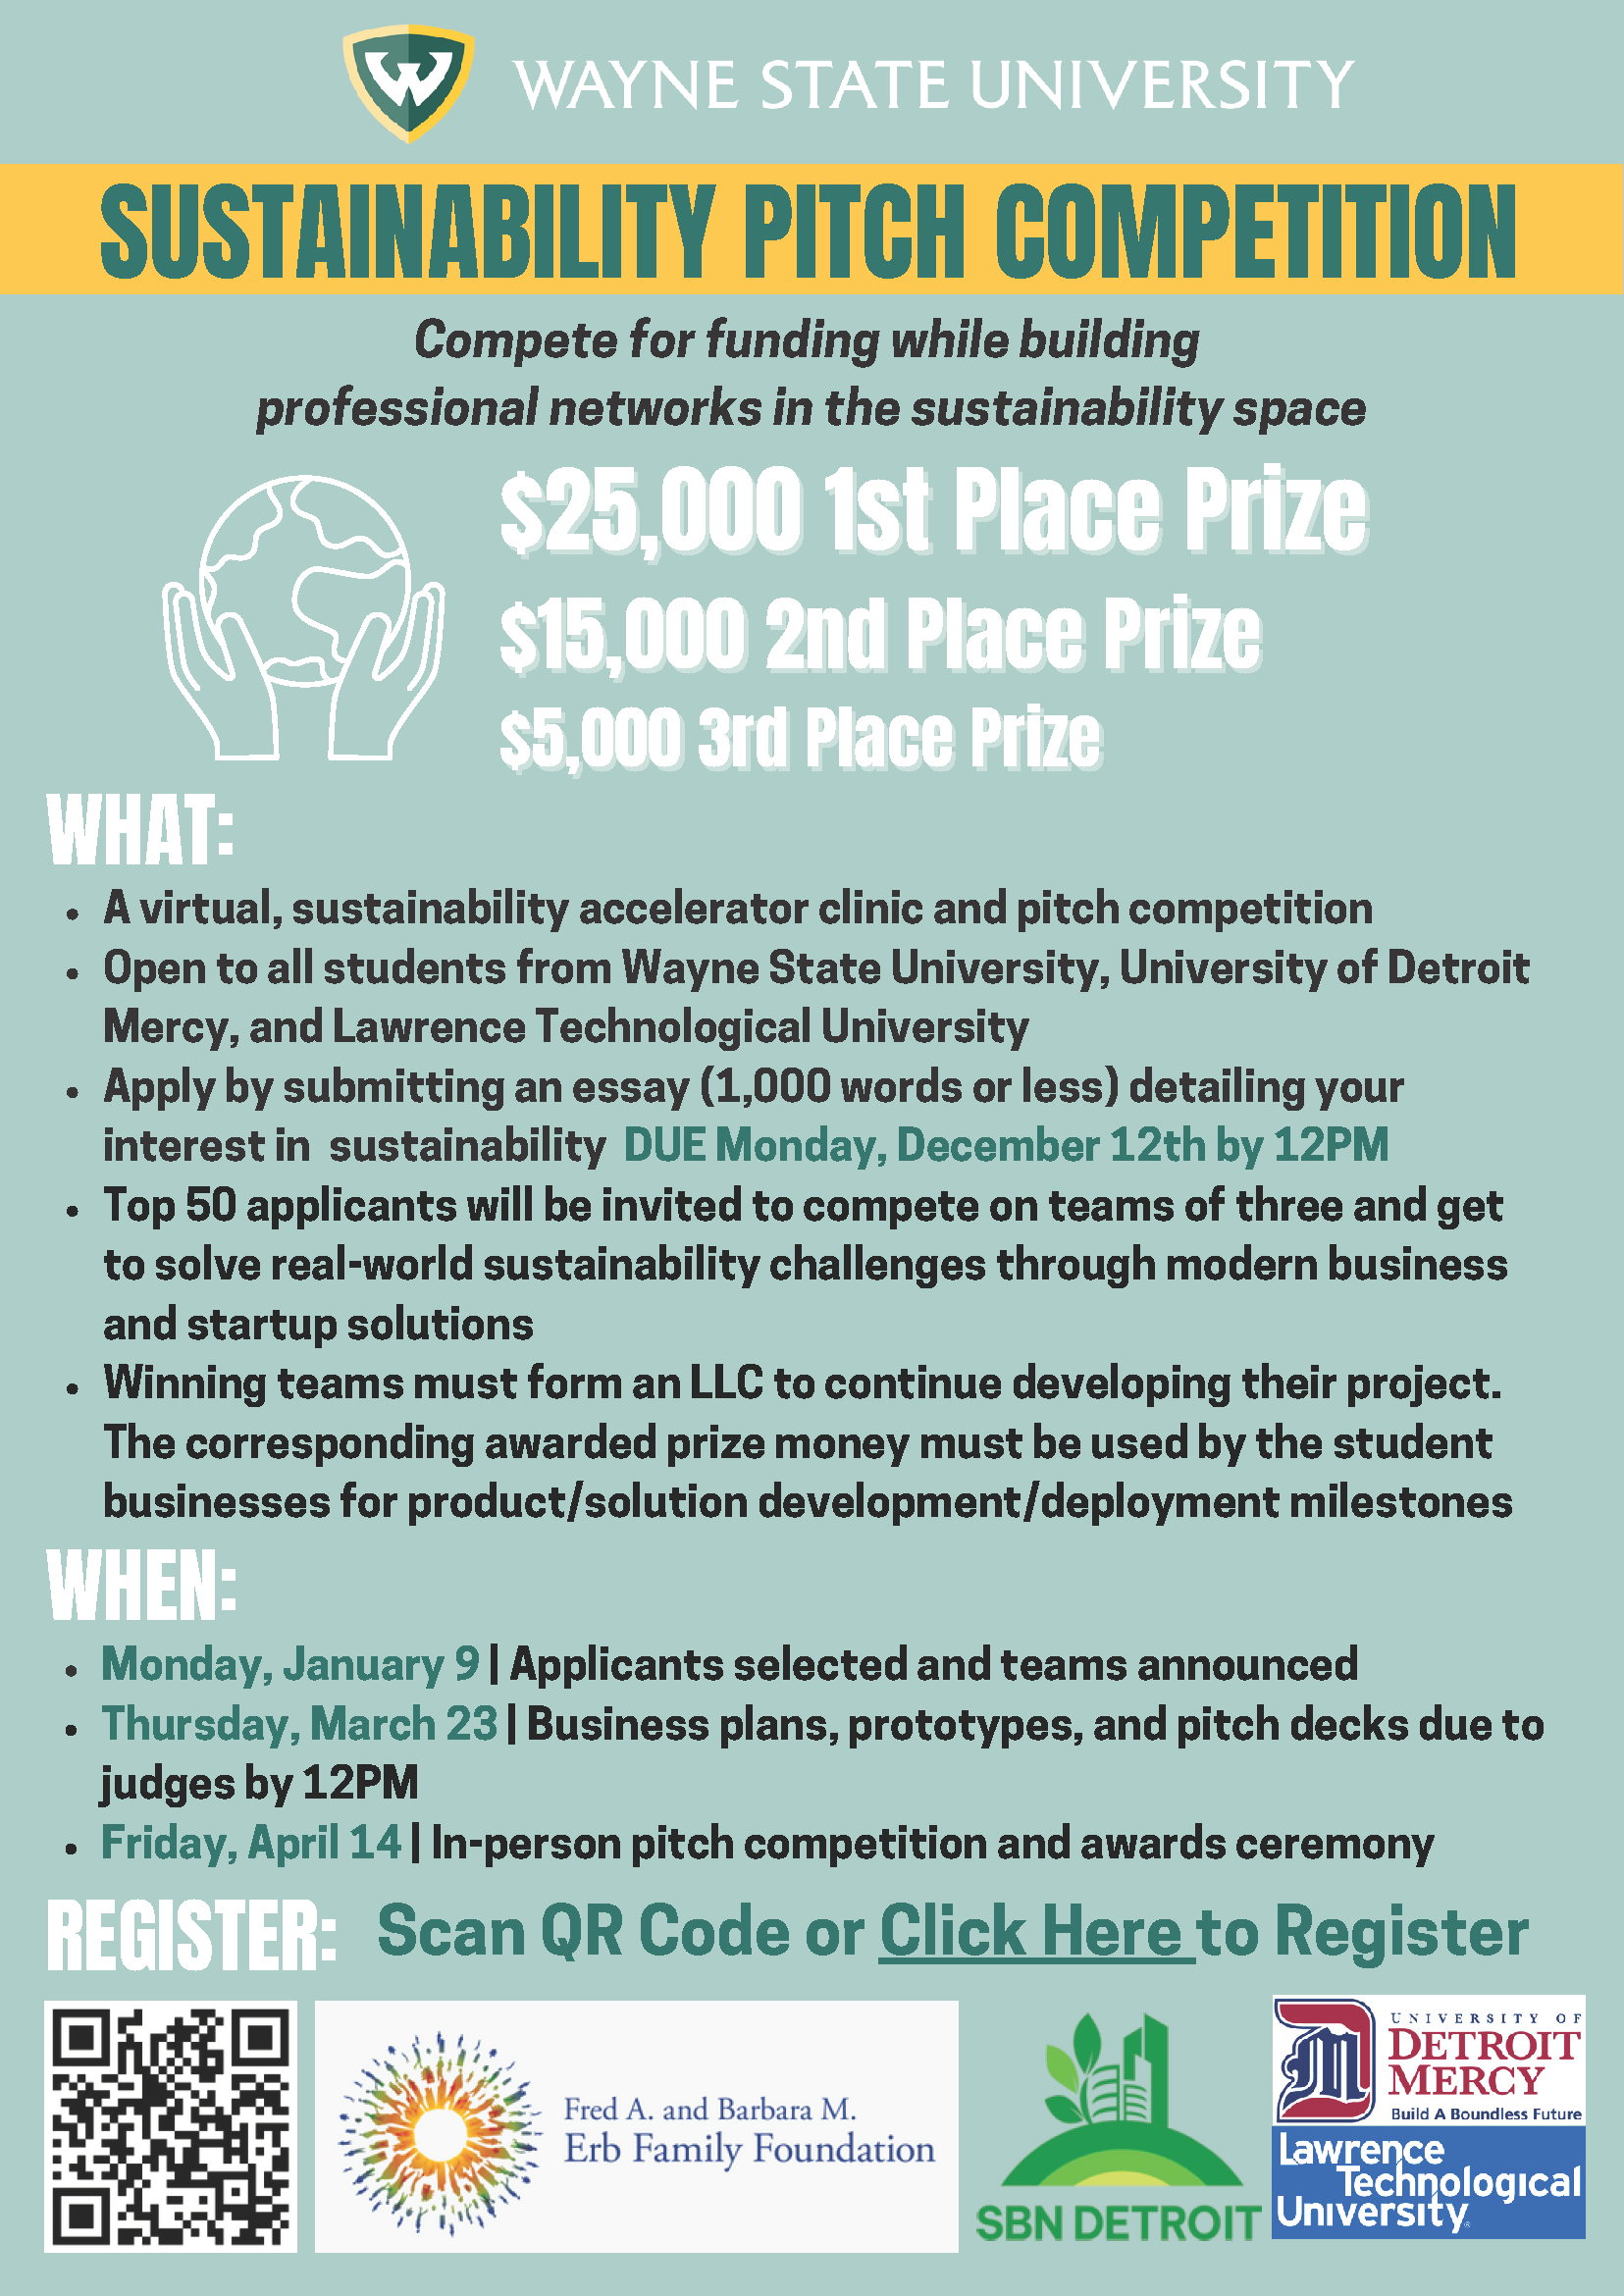 SUSTAINABILITY PITCH COMPETITION Compete for funding while building professional networks in the sustainability space $ 25,000 1st Place Prize $15,000 2nd Place Prize $5,000 3rd Place Prize WHAT: A virtual, sustainability accelerator clinic and pitch competition Open to all students from Wayne State University, University of Detroit Mercy, and Lawrence Technological University Apply by submitting an essay (1,000 words or less) detailing your interest in sustainability DUE Monday, December 12th by 12PM Top 50 applicants will be invited to compete on teams of three and get to solve real-world sustainability challenges through modern business and startup solutions Winning teams must form an LLC to continue developing their project. The corresponding awarded prize money must be used by the student businesses for product/solution development/deployment milestones WHEN: Monday, January 9 | Applicants selected and teams announced Thursday, March 23 | Business plans, prototypes, and pitch decks due to judges by 12PM Friday, April 14 | In-person pitch competition and awards ceremony REGISTER: Scan QR Code or Click Here to Register